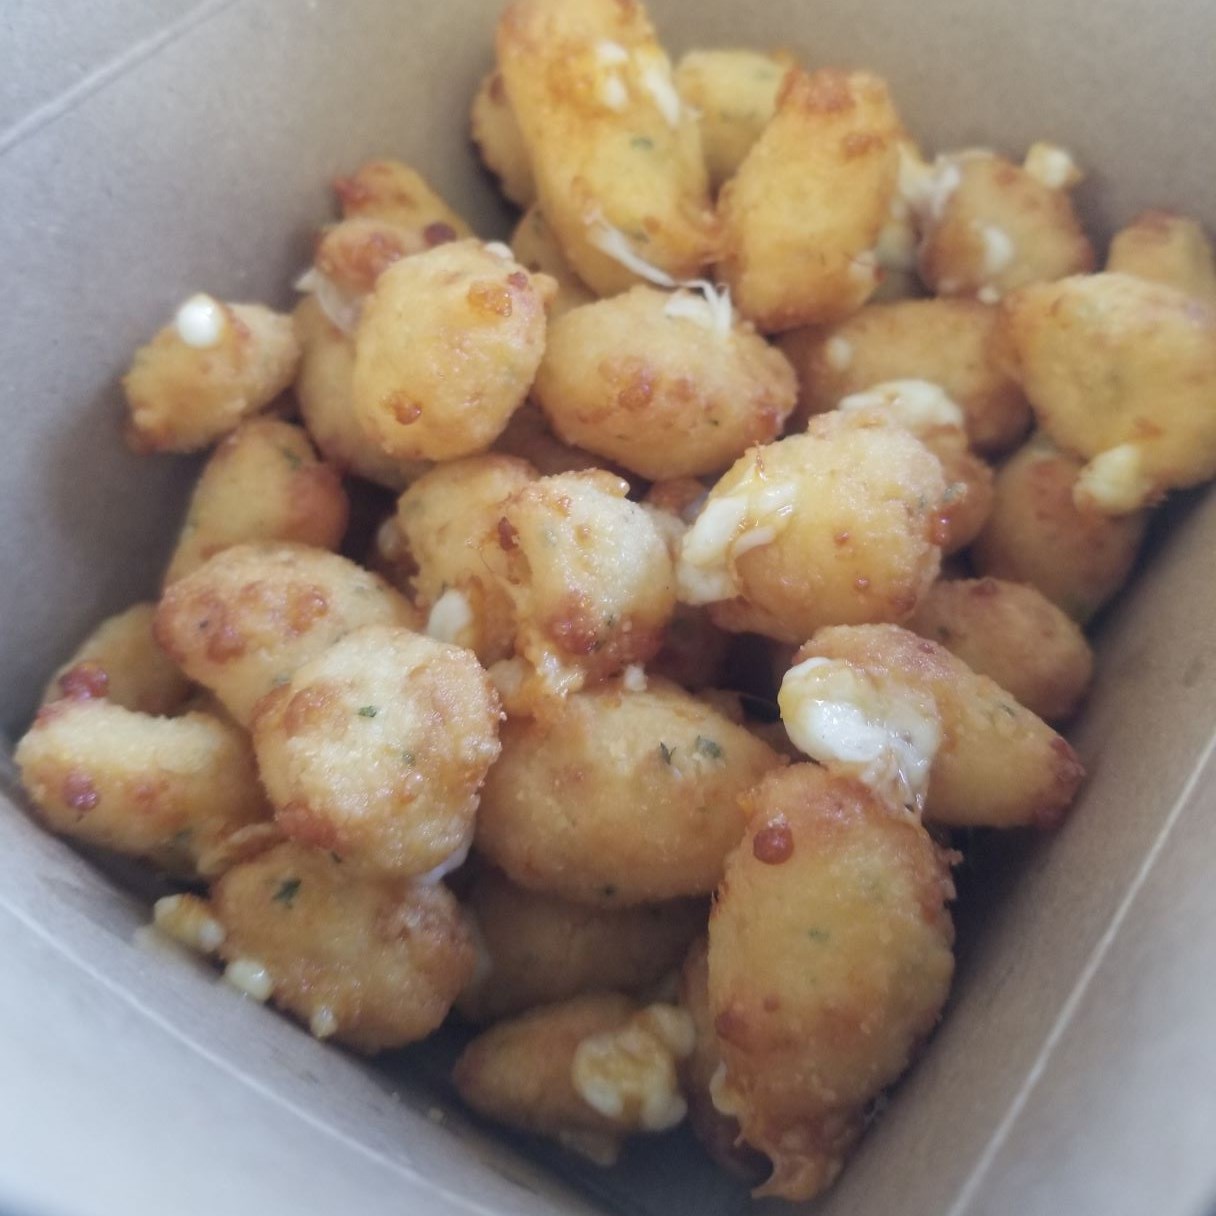 Stone Press cheese curds